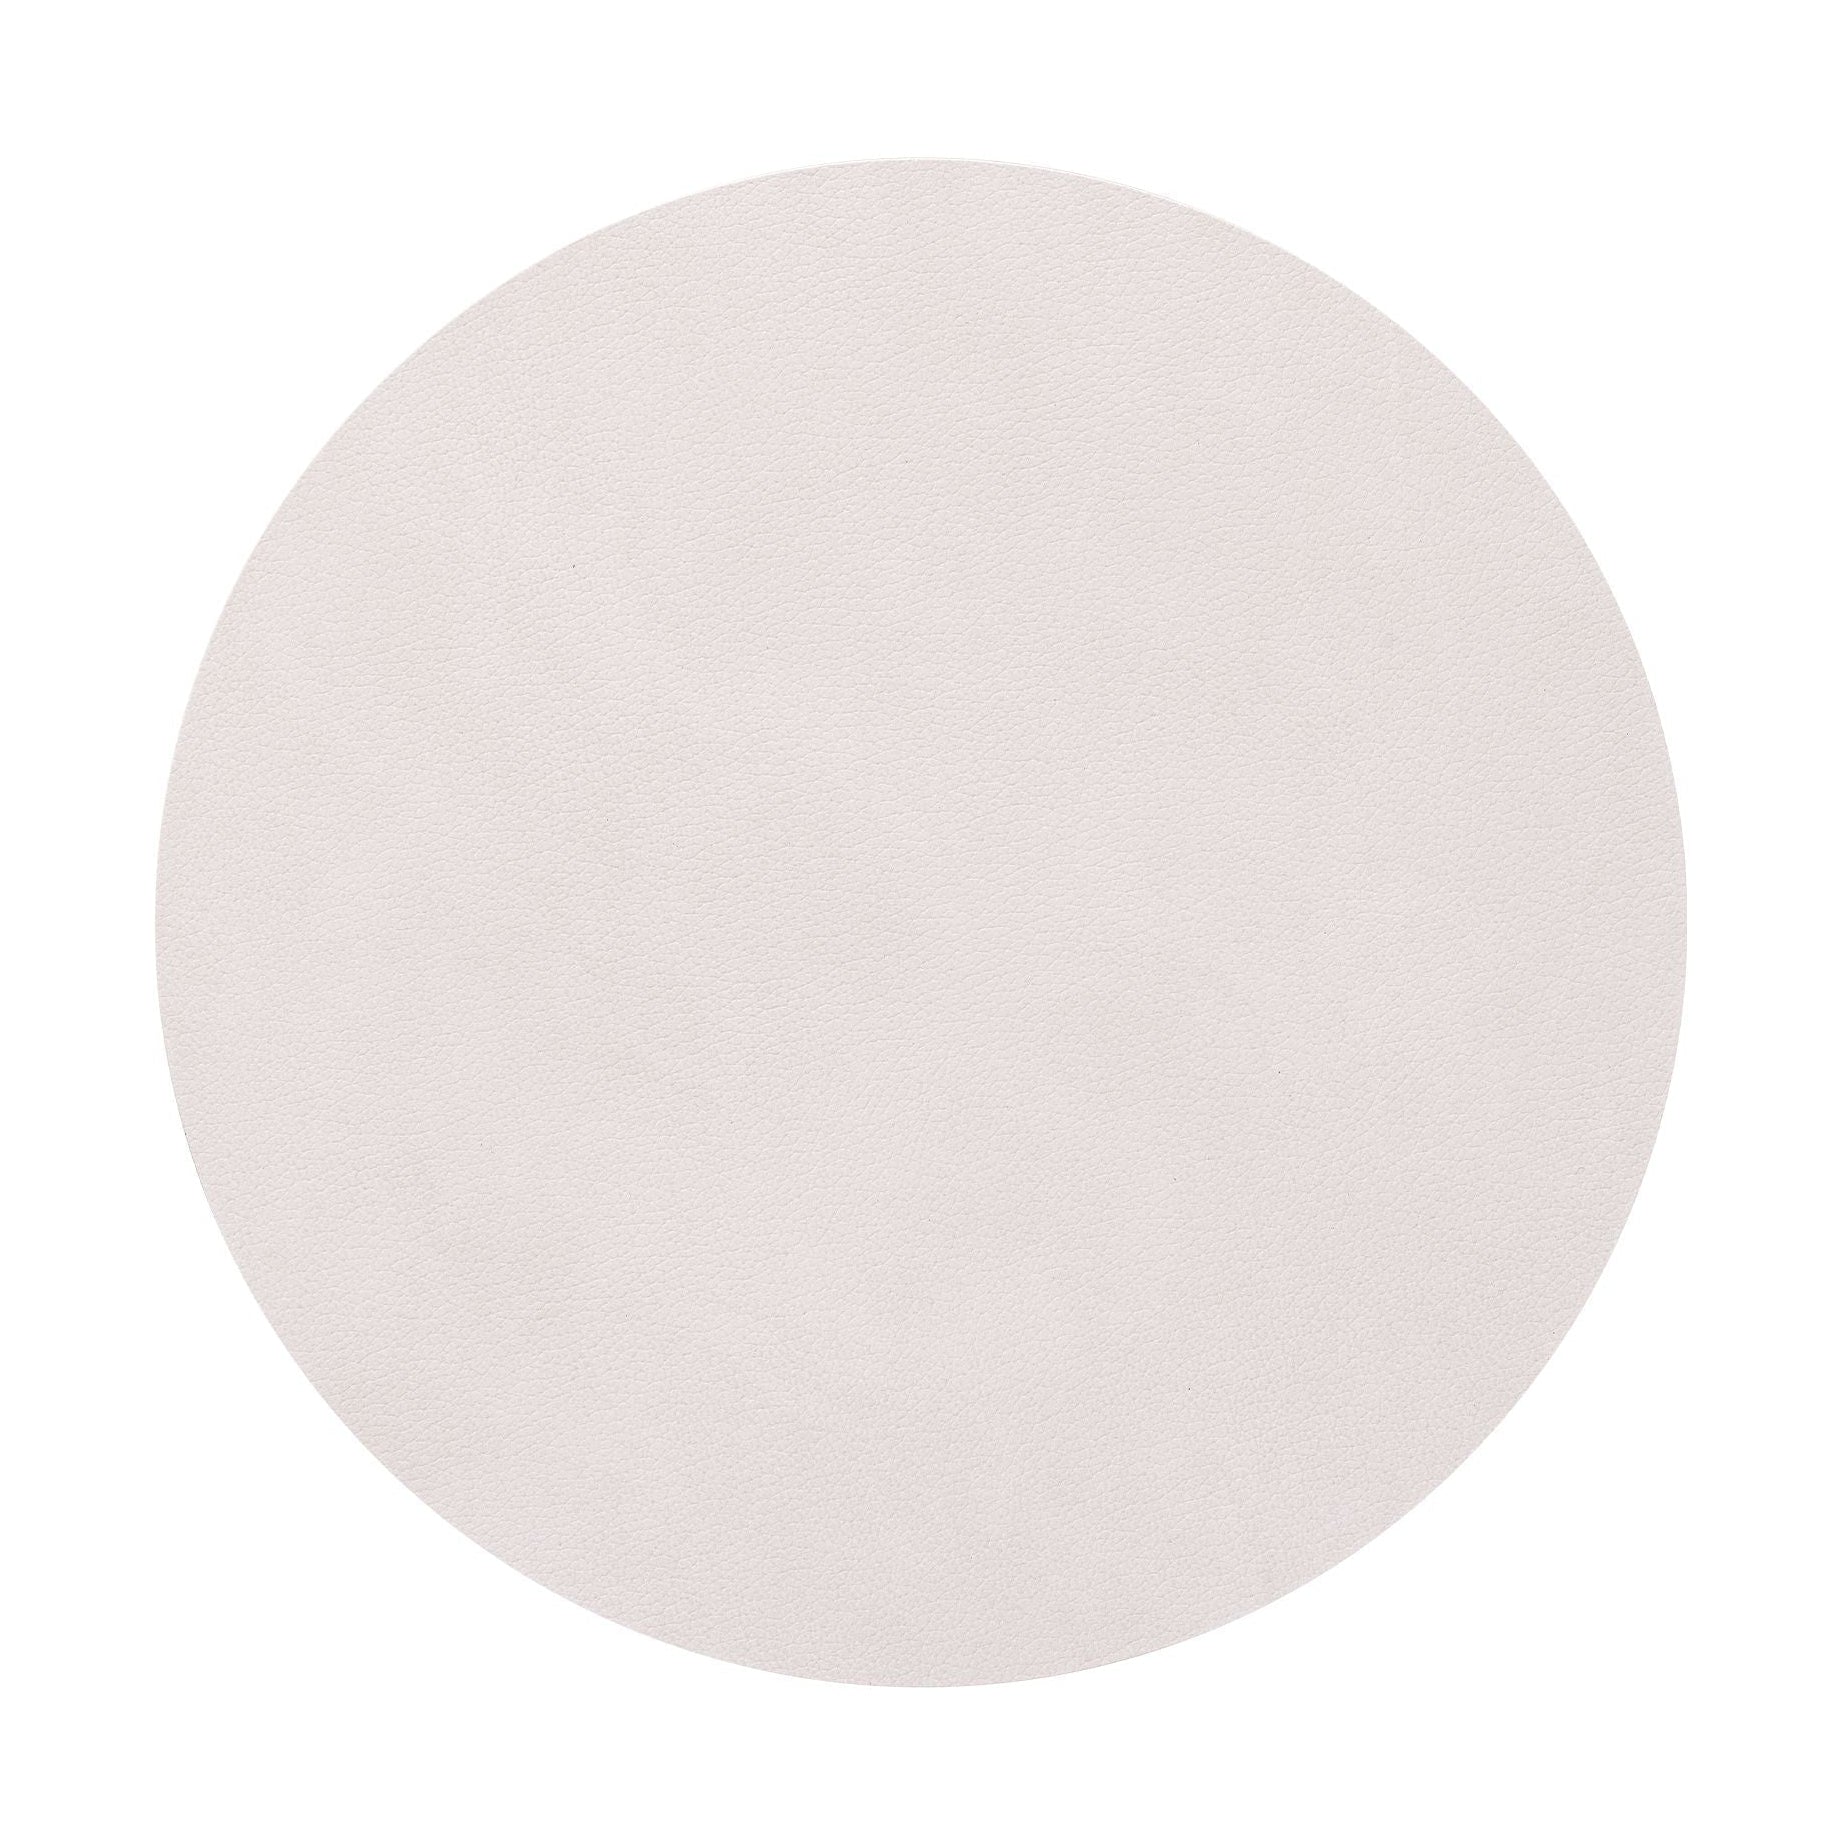 Lind Dna Tabelmat Circle S, Oyster White